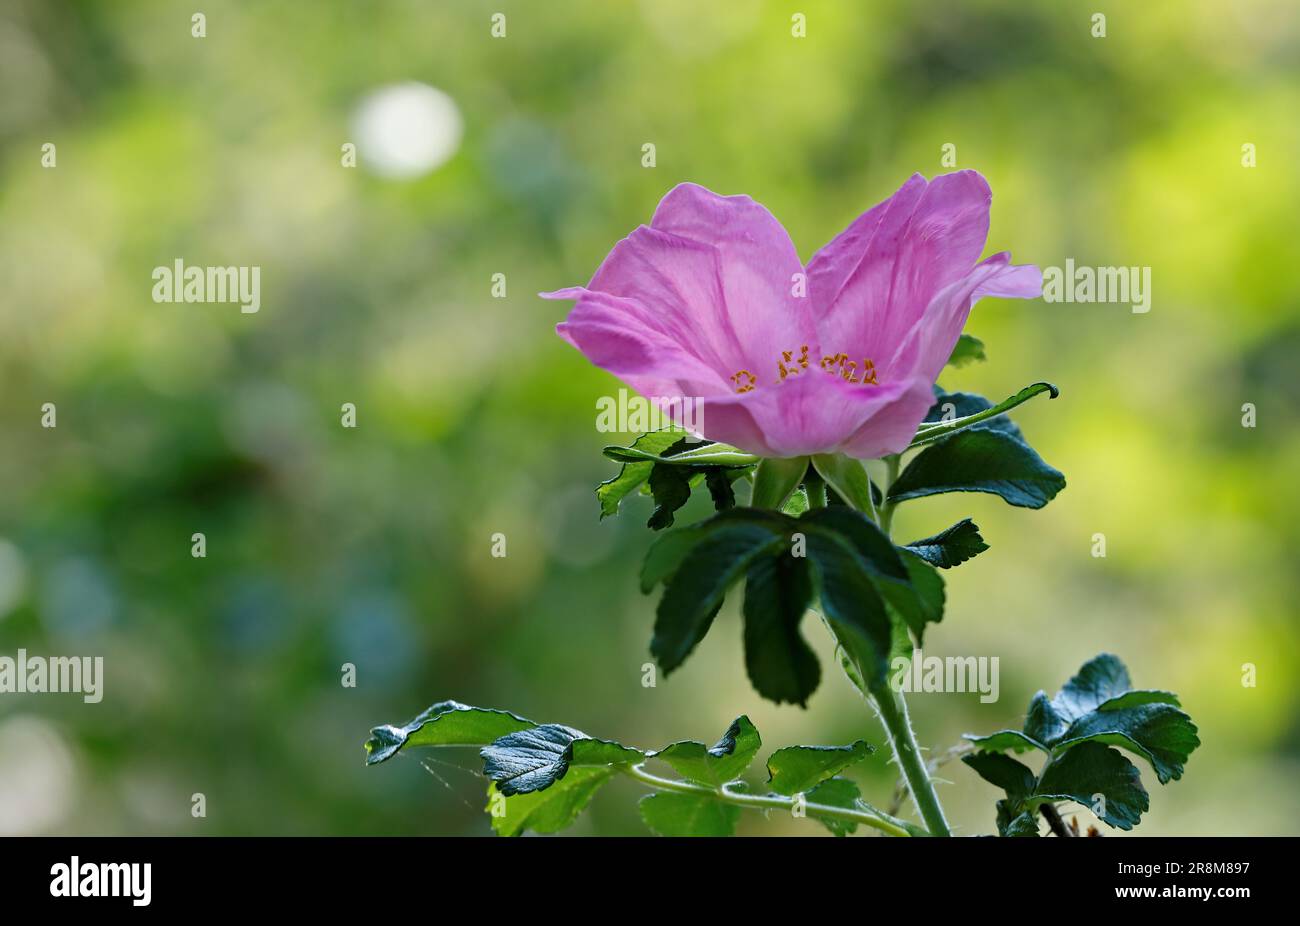 Beach rose blooming with fragant purple flower. Planting forbidden in Finland Stock Photo